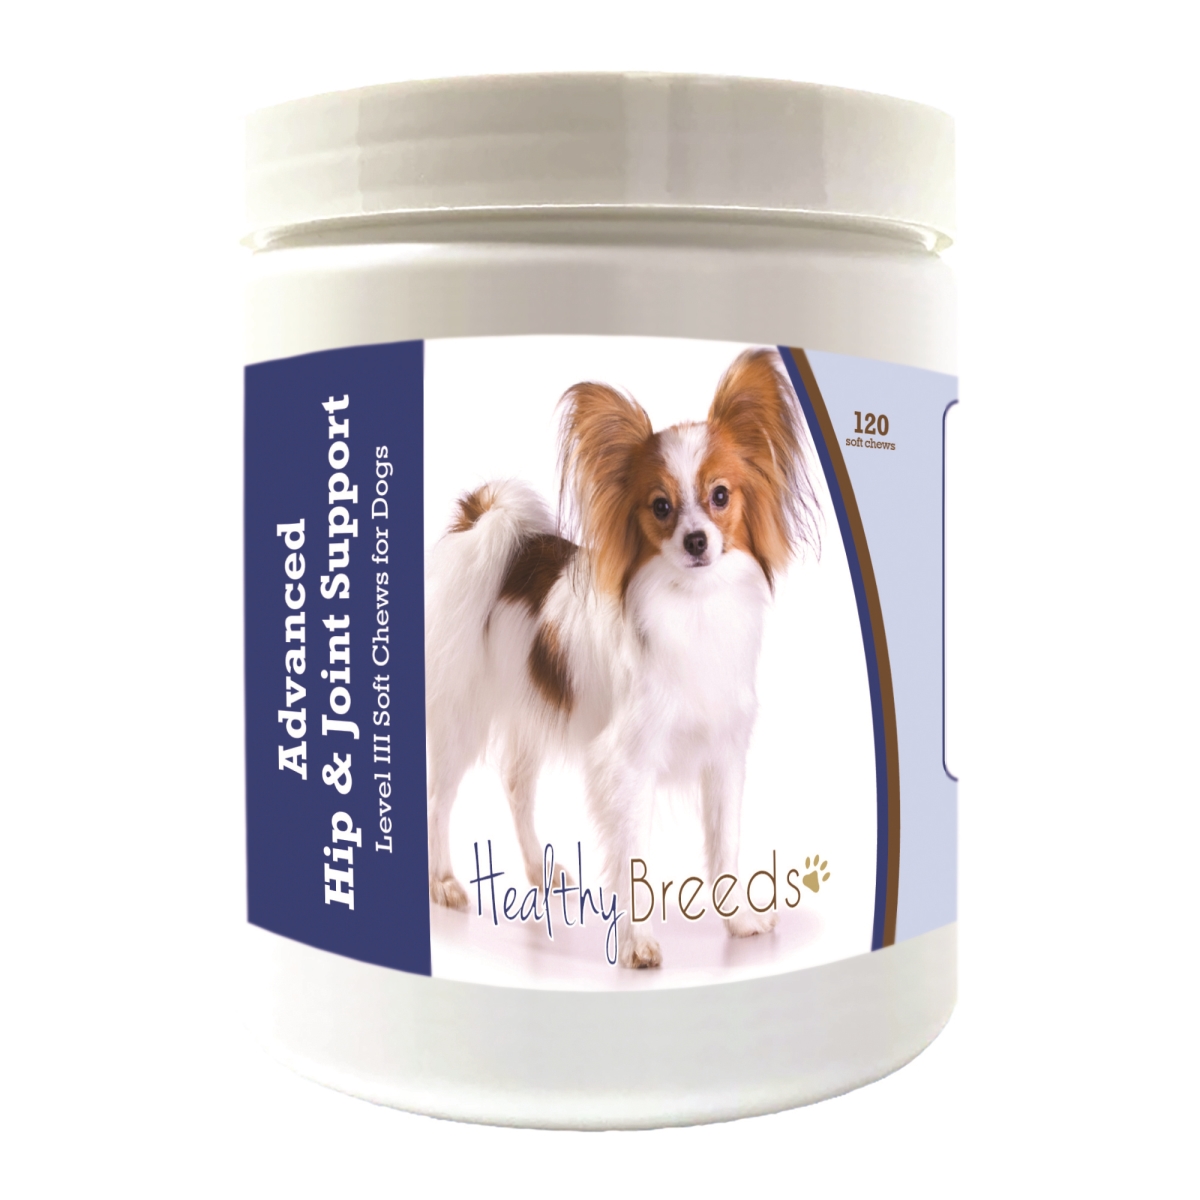 Picture of Healthy Breeds 192959898859 Papillon Advanced Hip & Joint Support Level III Soft Chews for Dogs